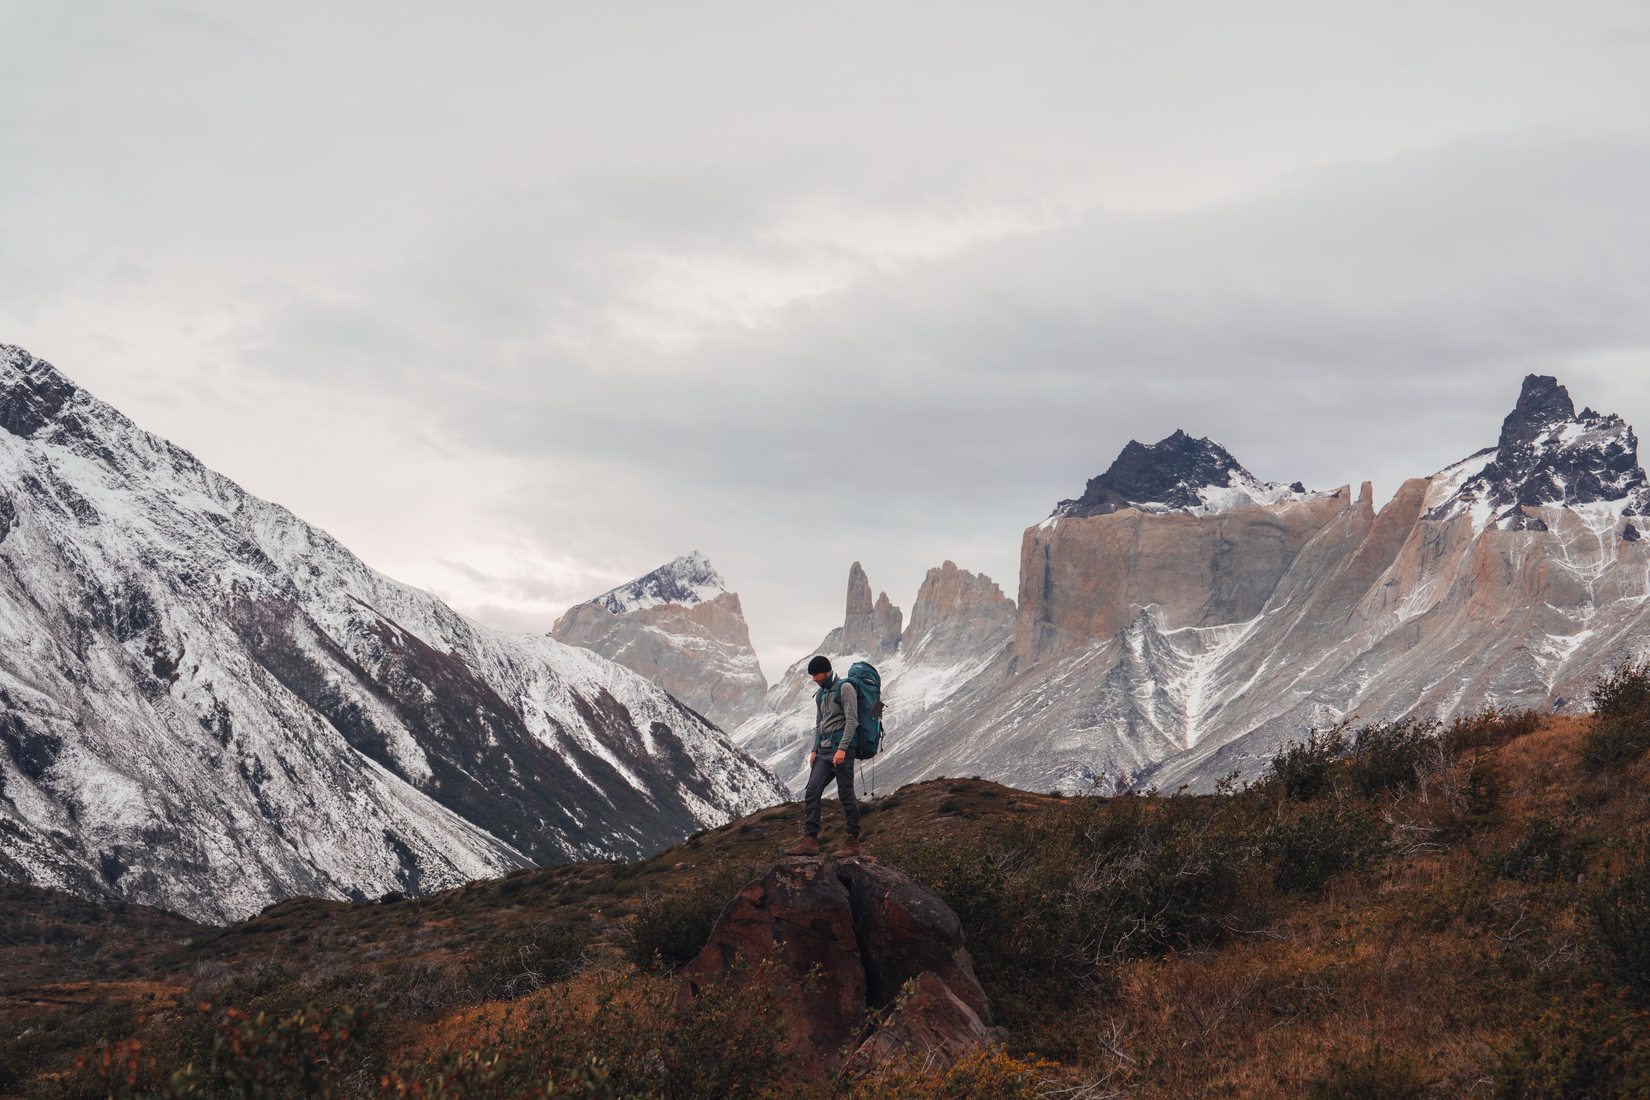 Torres Del Paine W Trek - Guide To Patagonia's Most Popular Hike